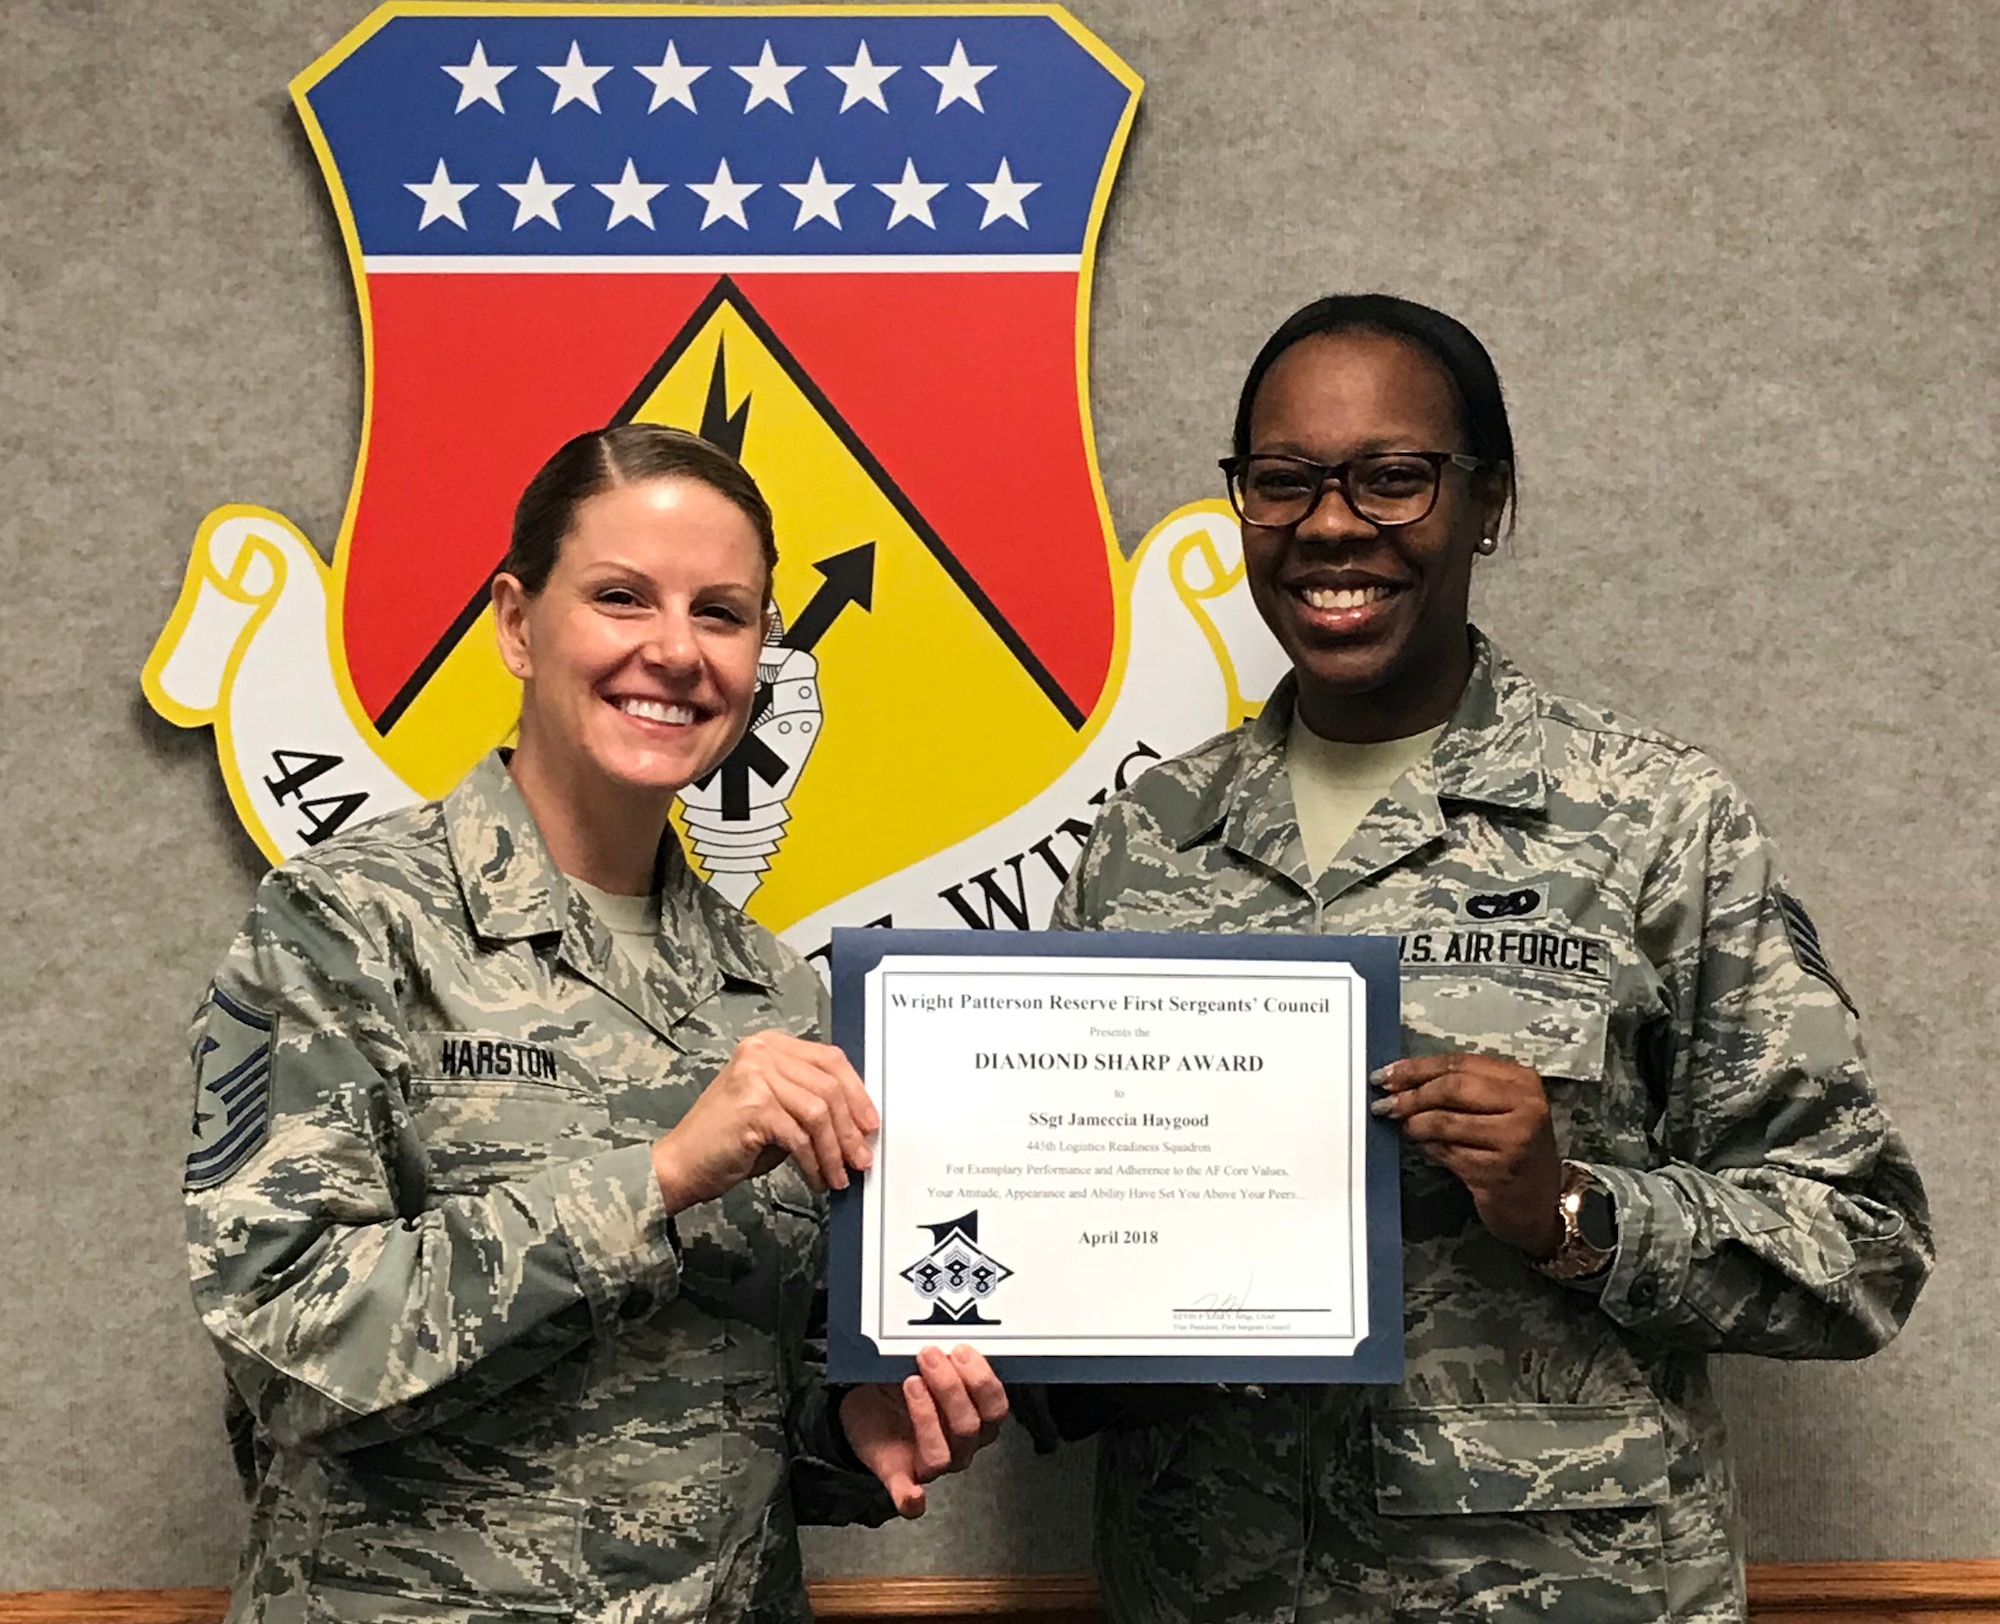 Master Sgt. Lauren Harston, 445th Logistics Readiness Squadron first sergeant, presents the April 2018 Diamond Sharp Award to Staff Sgt. Jameccia Haygood, 445th Logistics Readiness Squadron, during the June 9, 2018 unit training assembly. The award is for exemplary performance, adherence to the Air Force Core Values, attitude, appearance and ability.